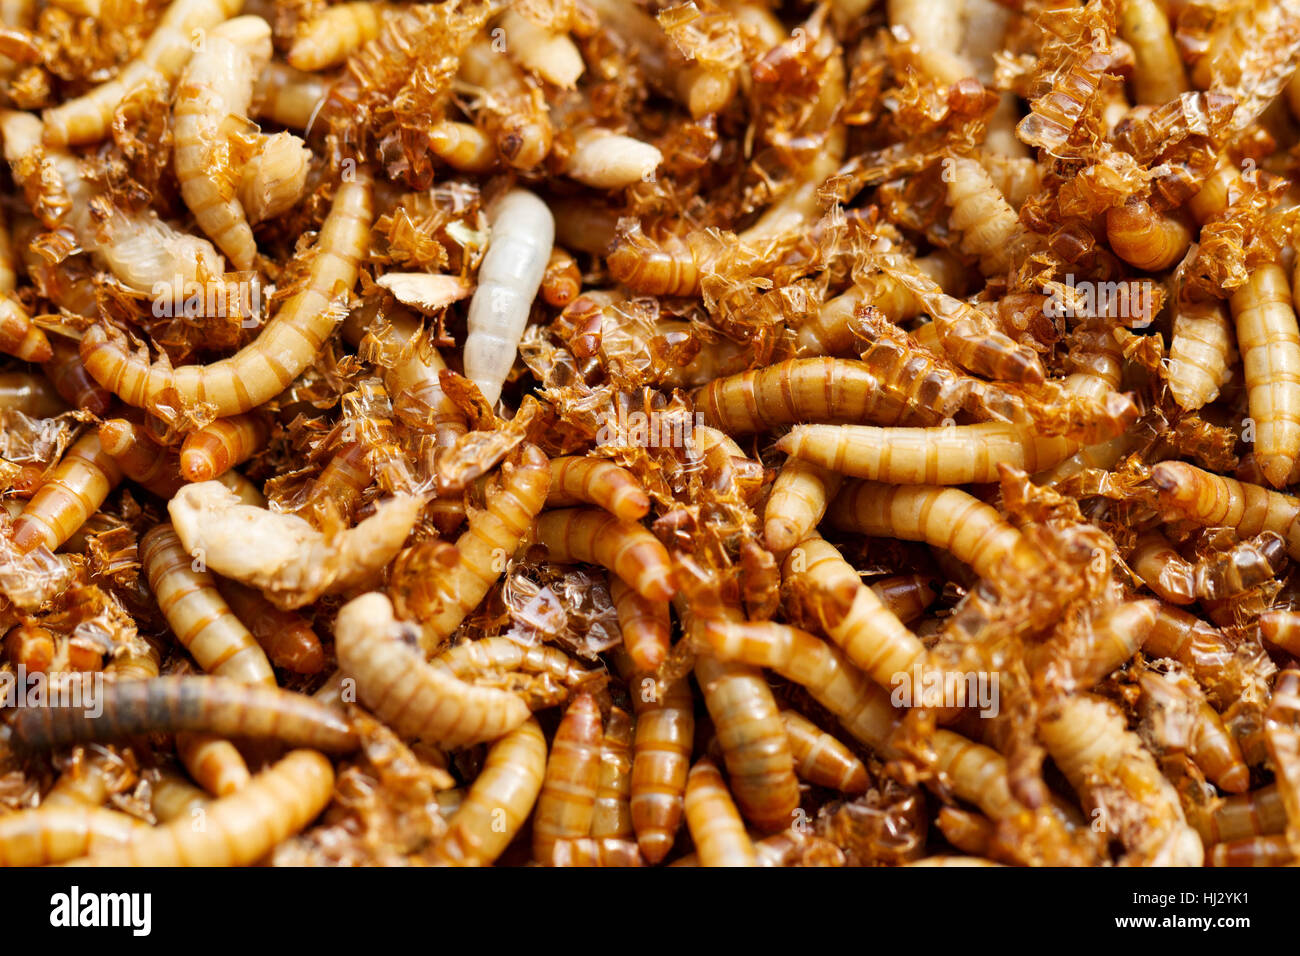 A scatter of mealworm larvae, used for feeding birds, reptiles or fish. 